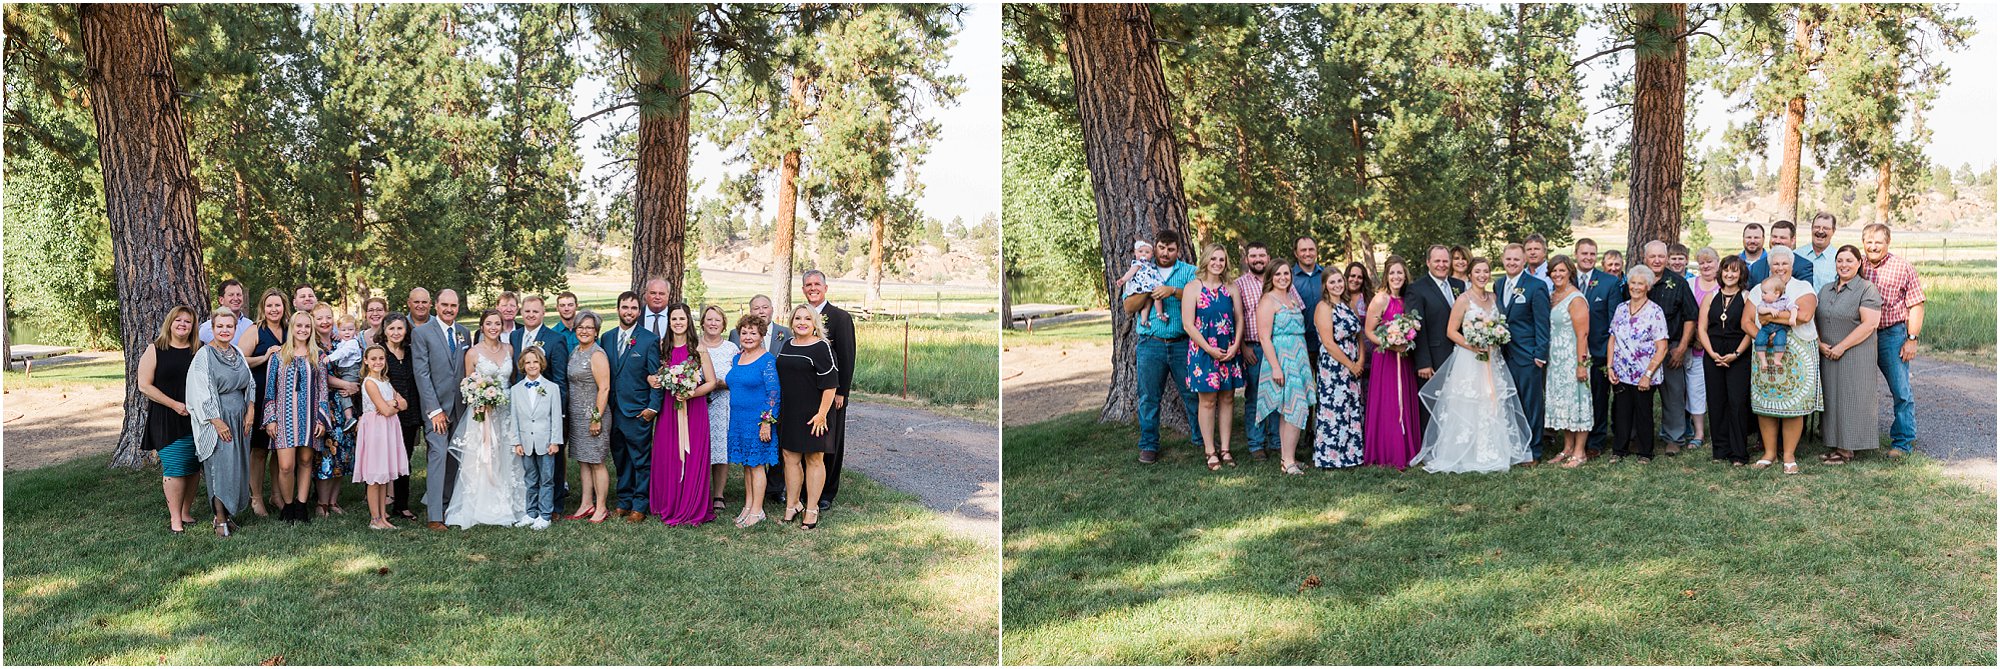 Extended family formal photos at your wedding become treasured heirlooms for years to come. | Bend Wedding Photographer Erica Swantek Photography